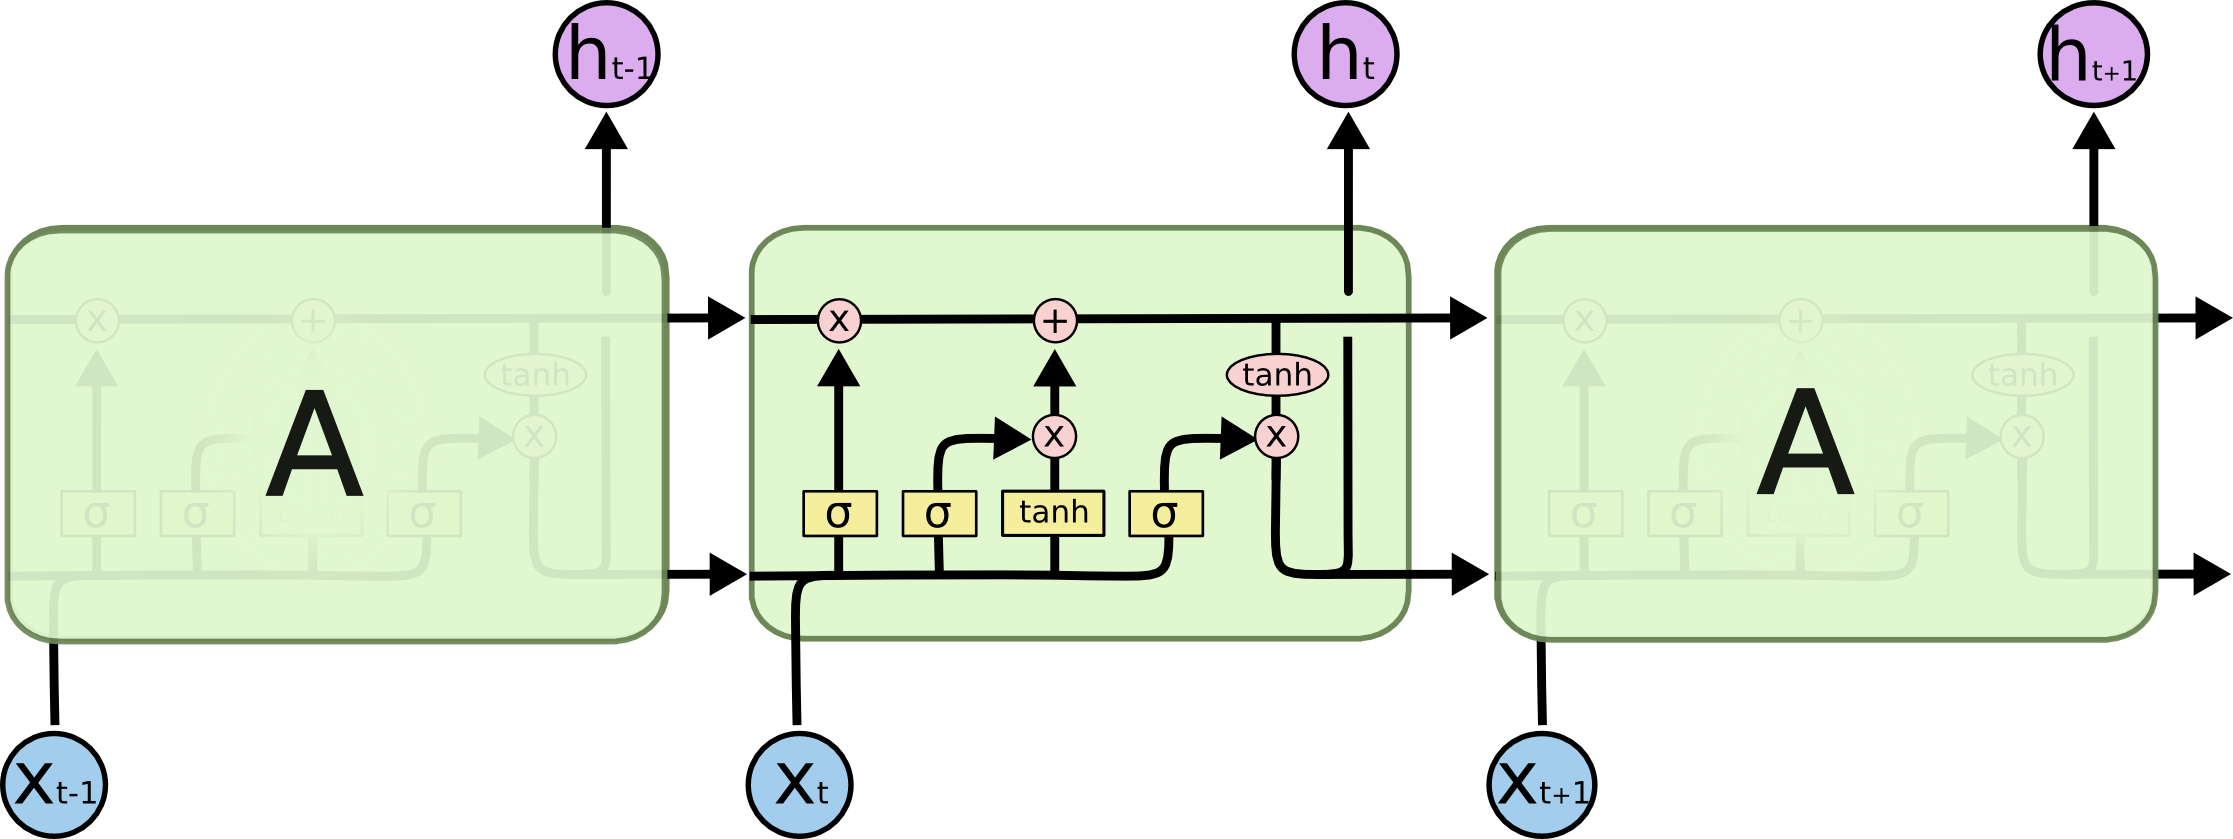 LSTM3-chain image